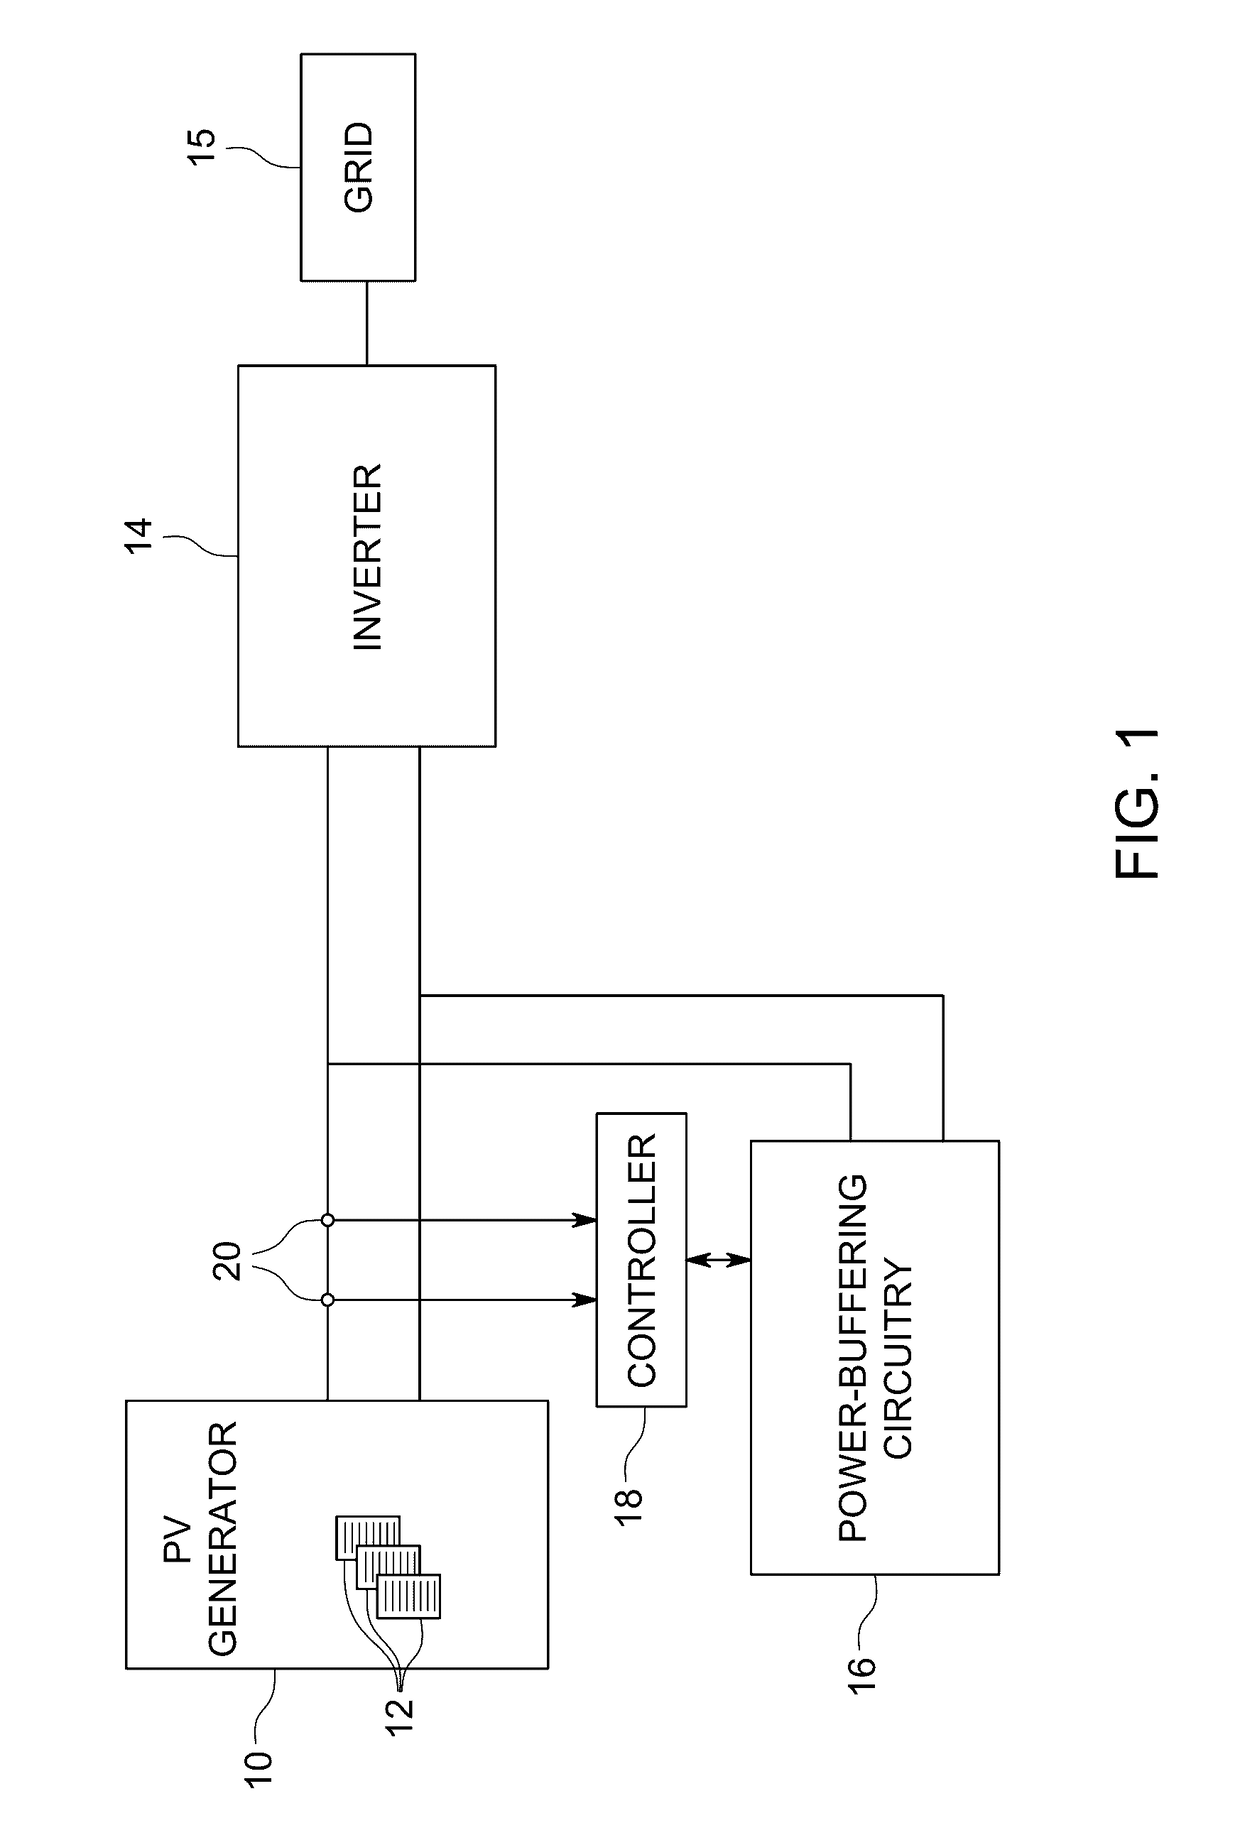 Photovoltaic power generation system including apparatus and method to buffer power fluctuations